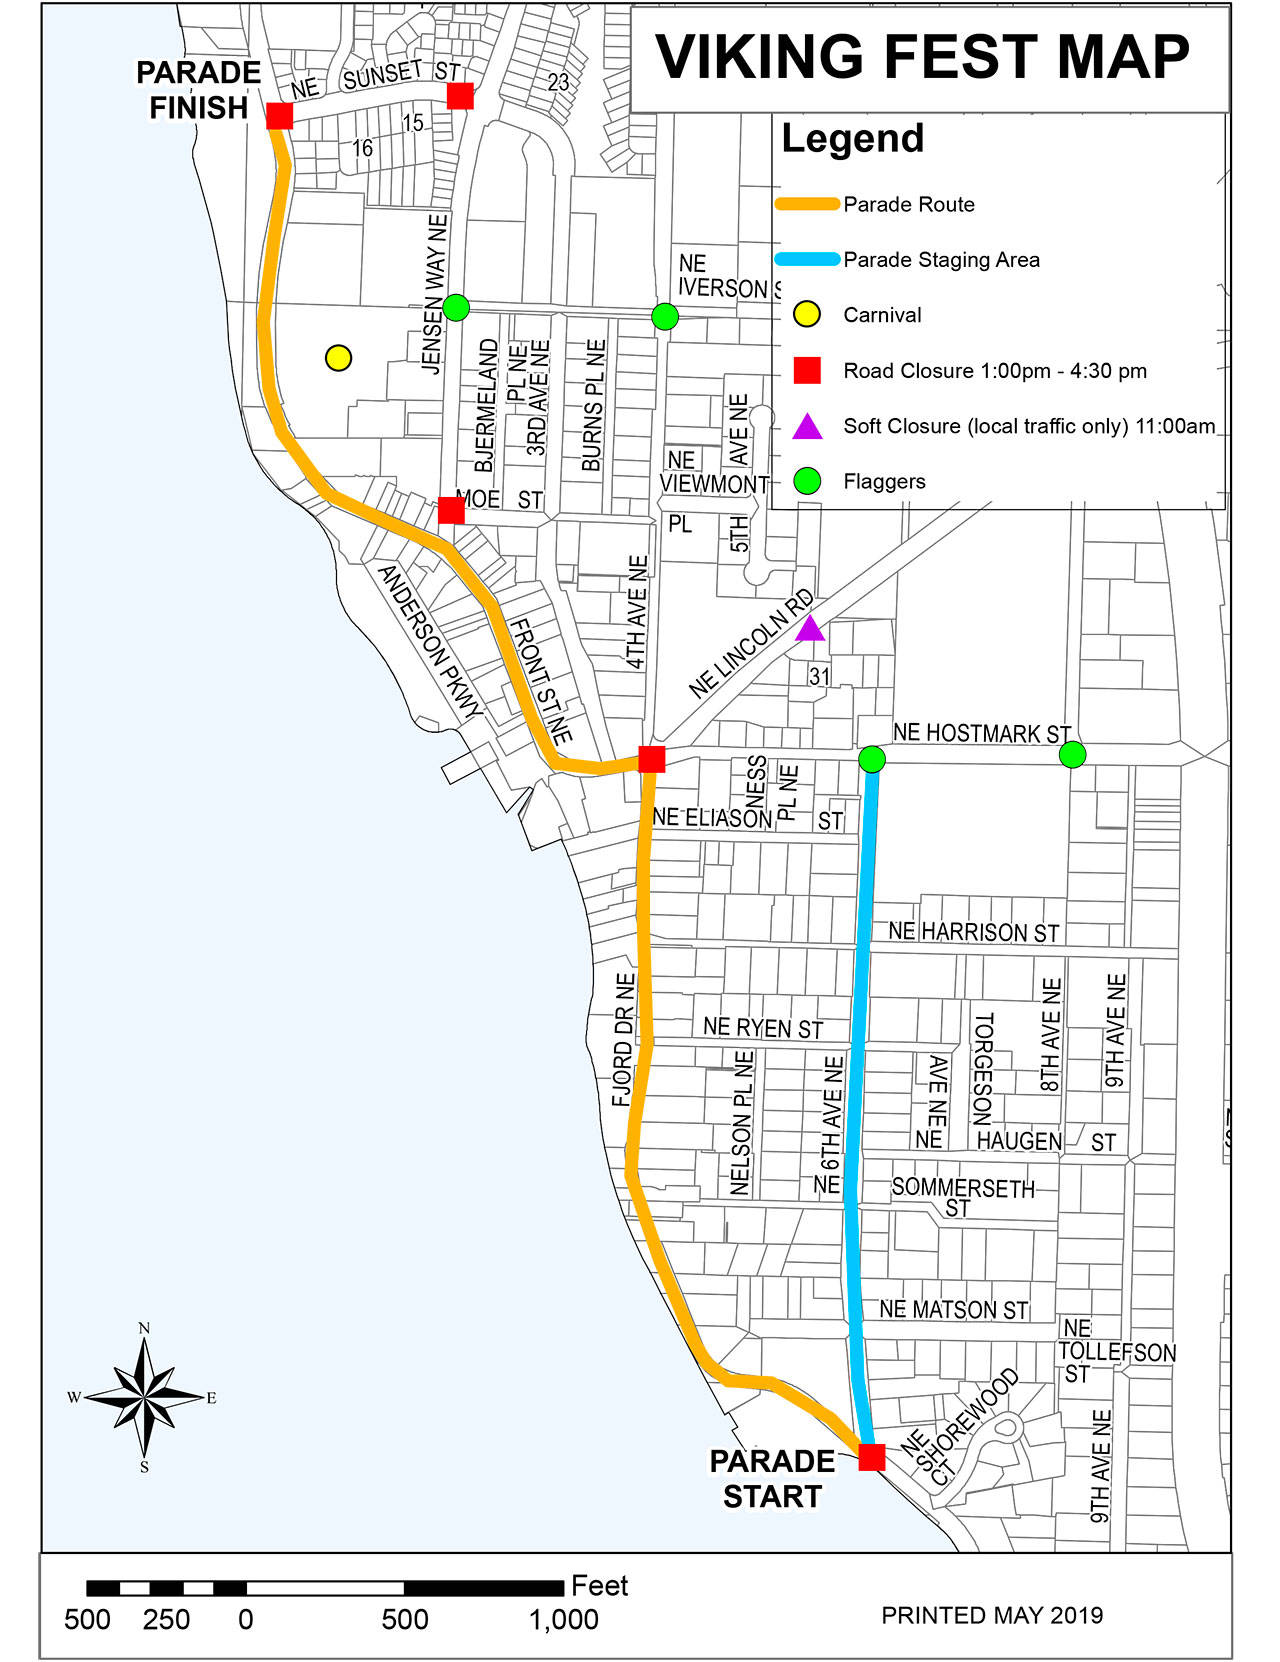 Downtown Poulsbo road closures planned for Viking Fest